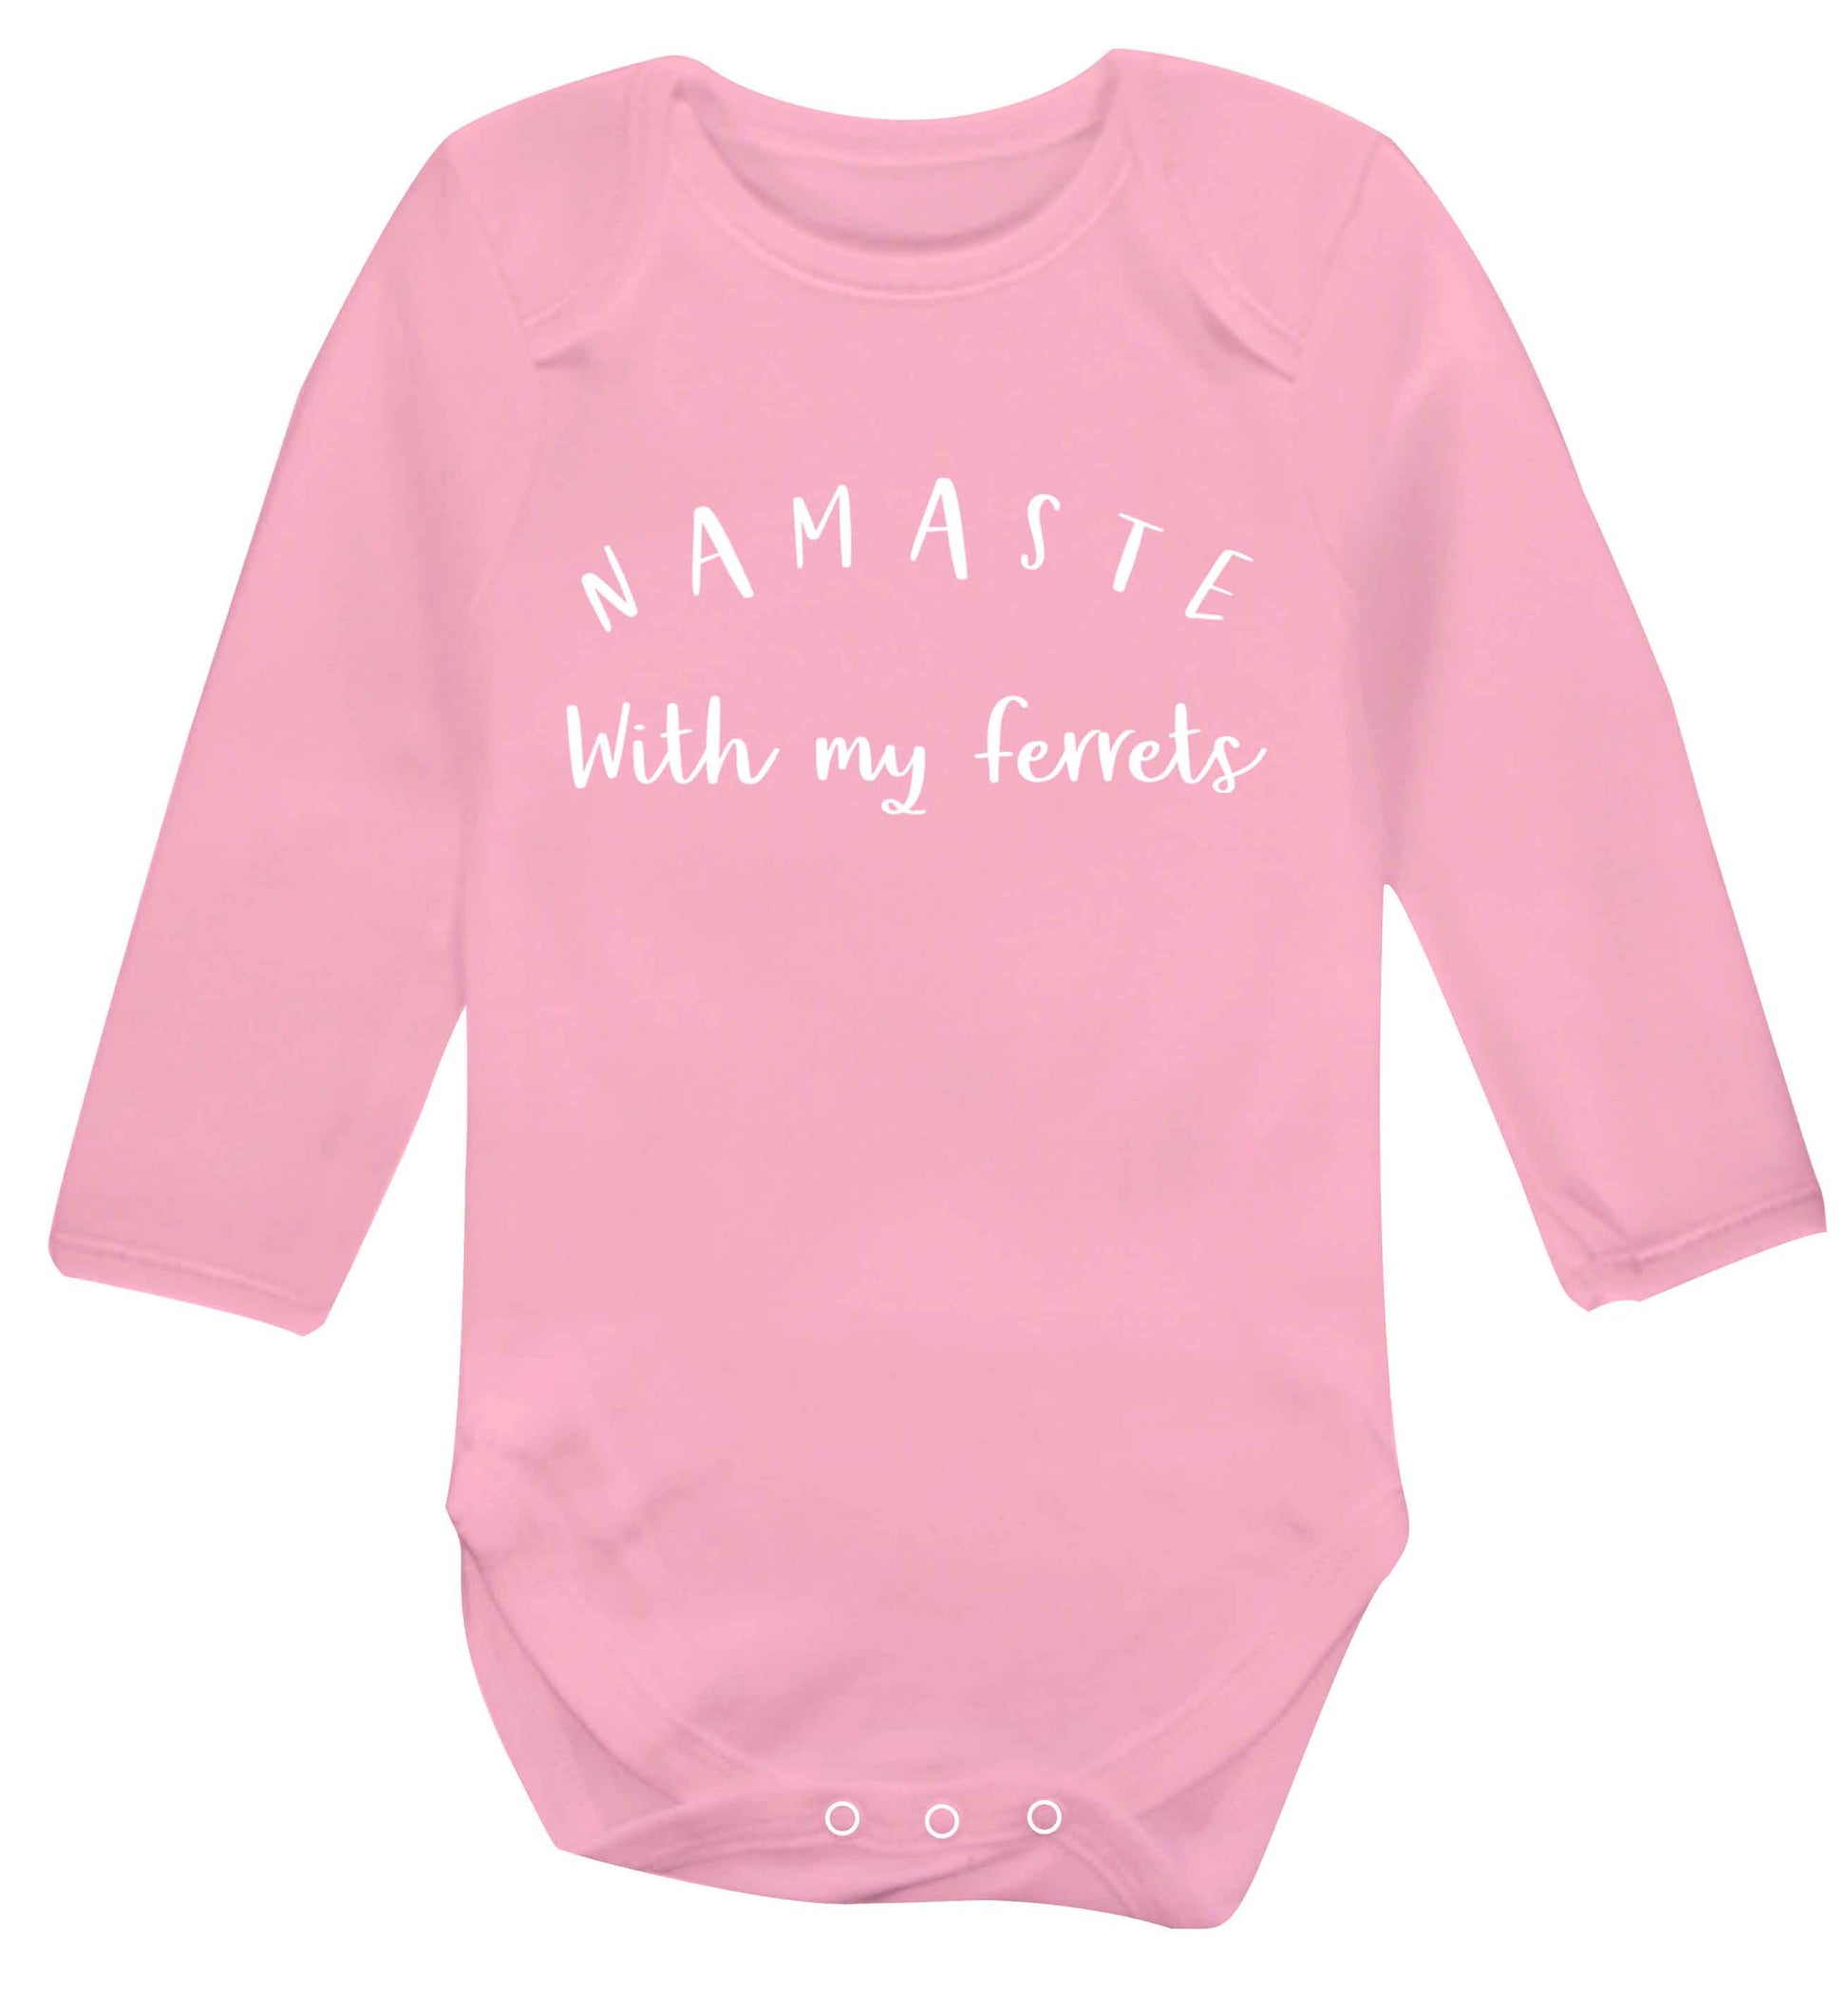 Namaste with my ferrets Baby Vest long sleeved pale pink 6-12 months